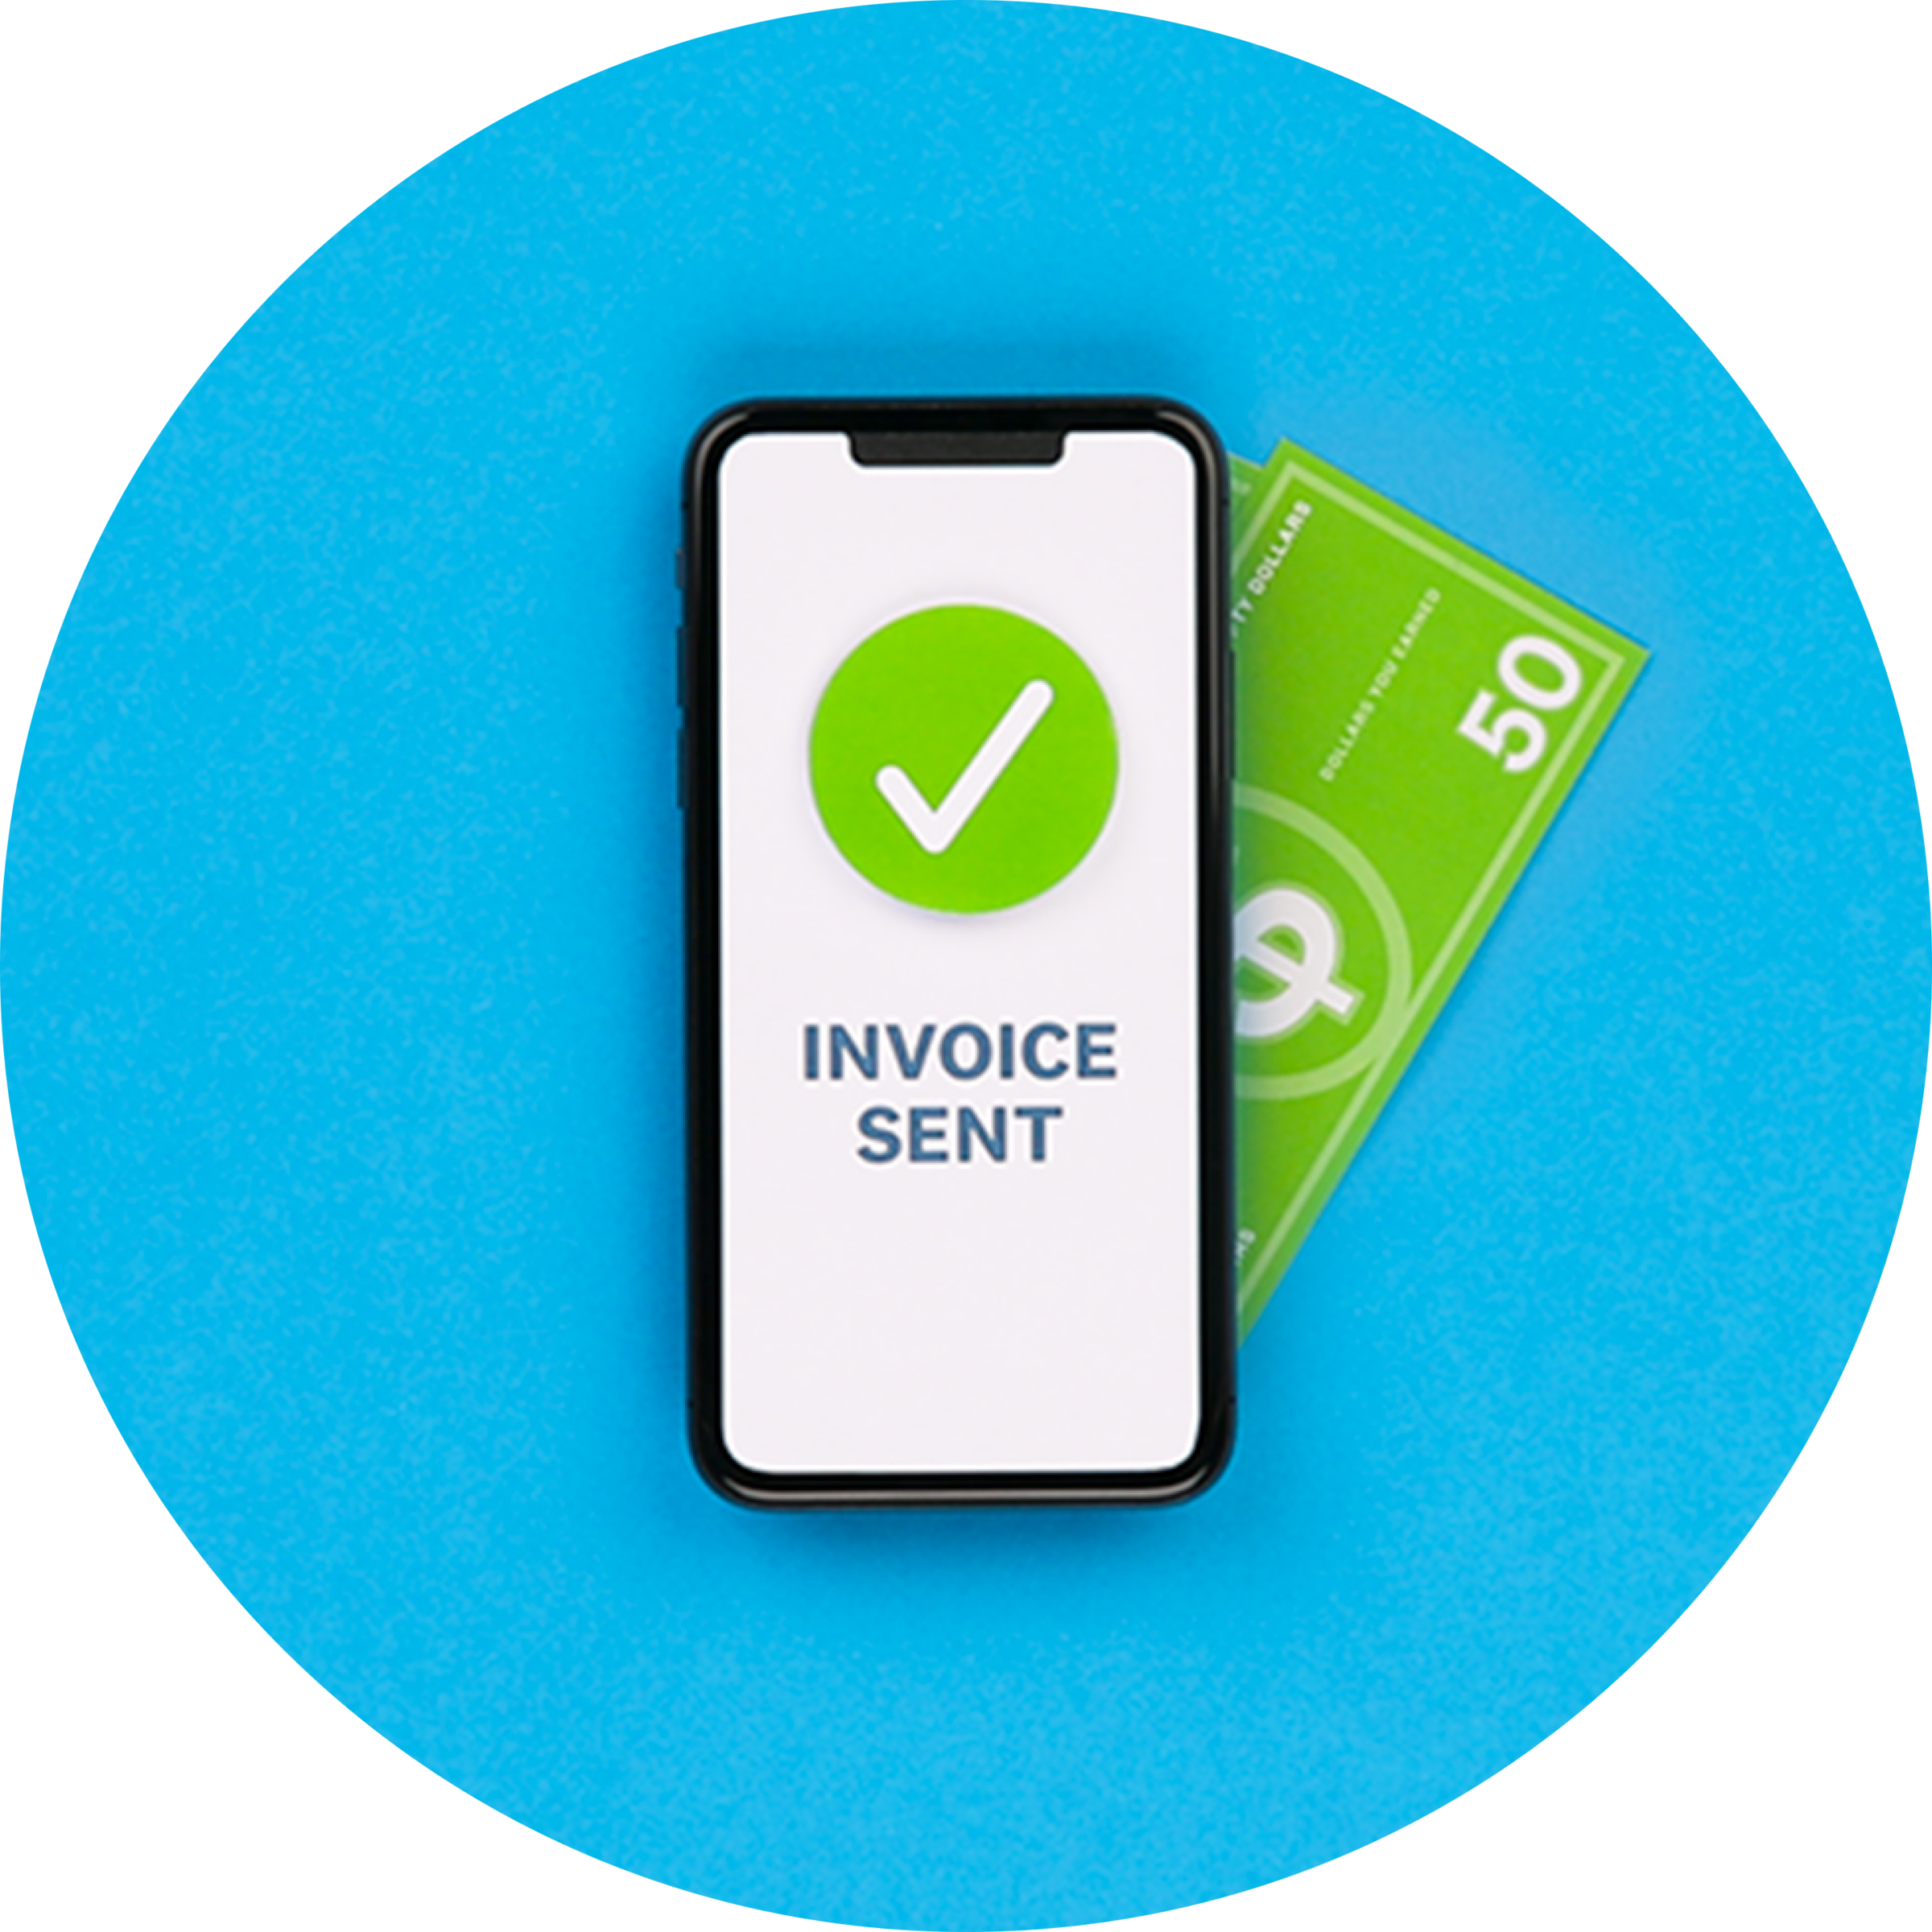 An invoice sent message displays in the Xero Accounting app.